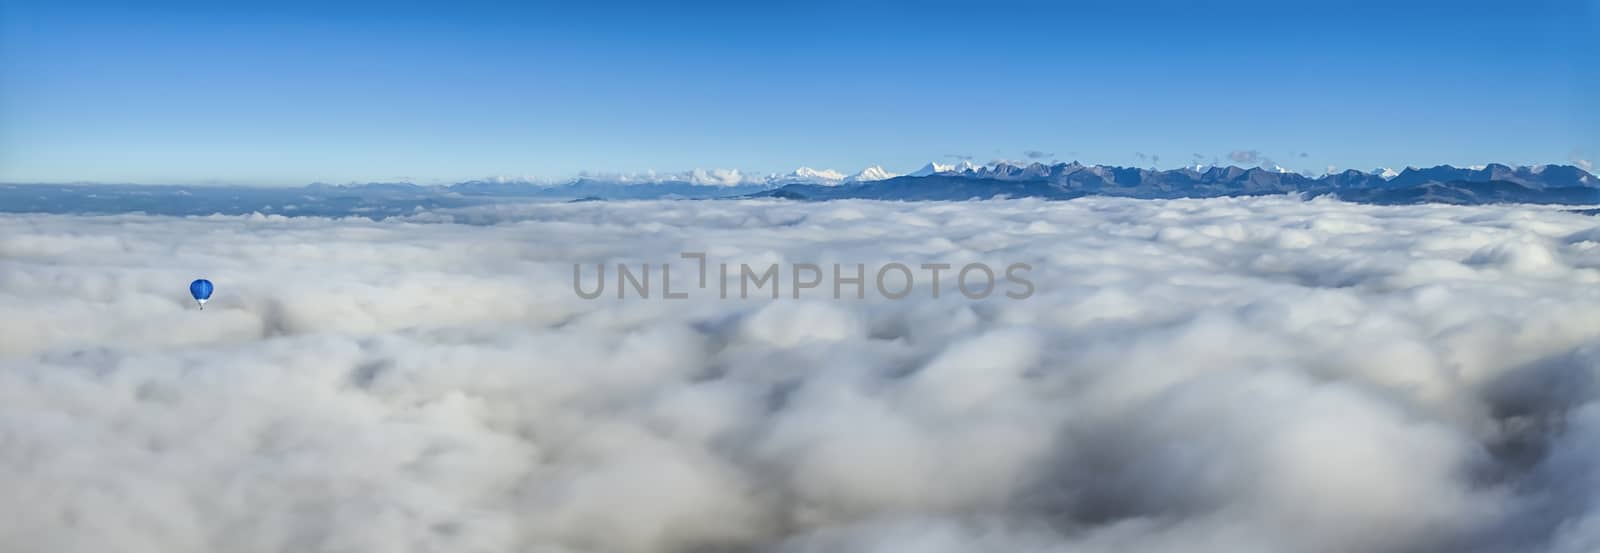 Hot air balloon upon clouds seeing Alps mountains range, Switzerland by Elenaphotos21